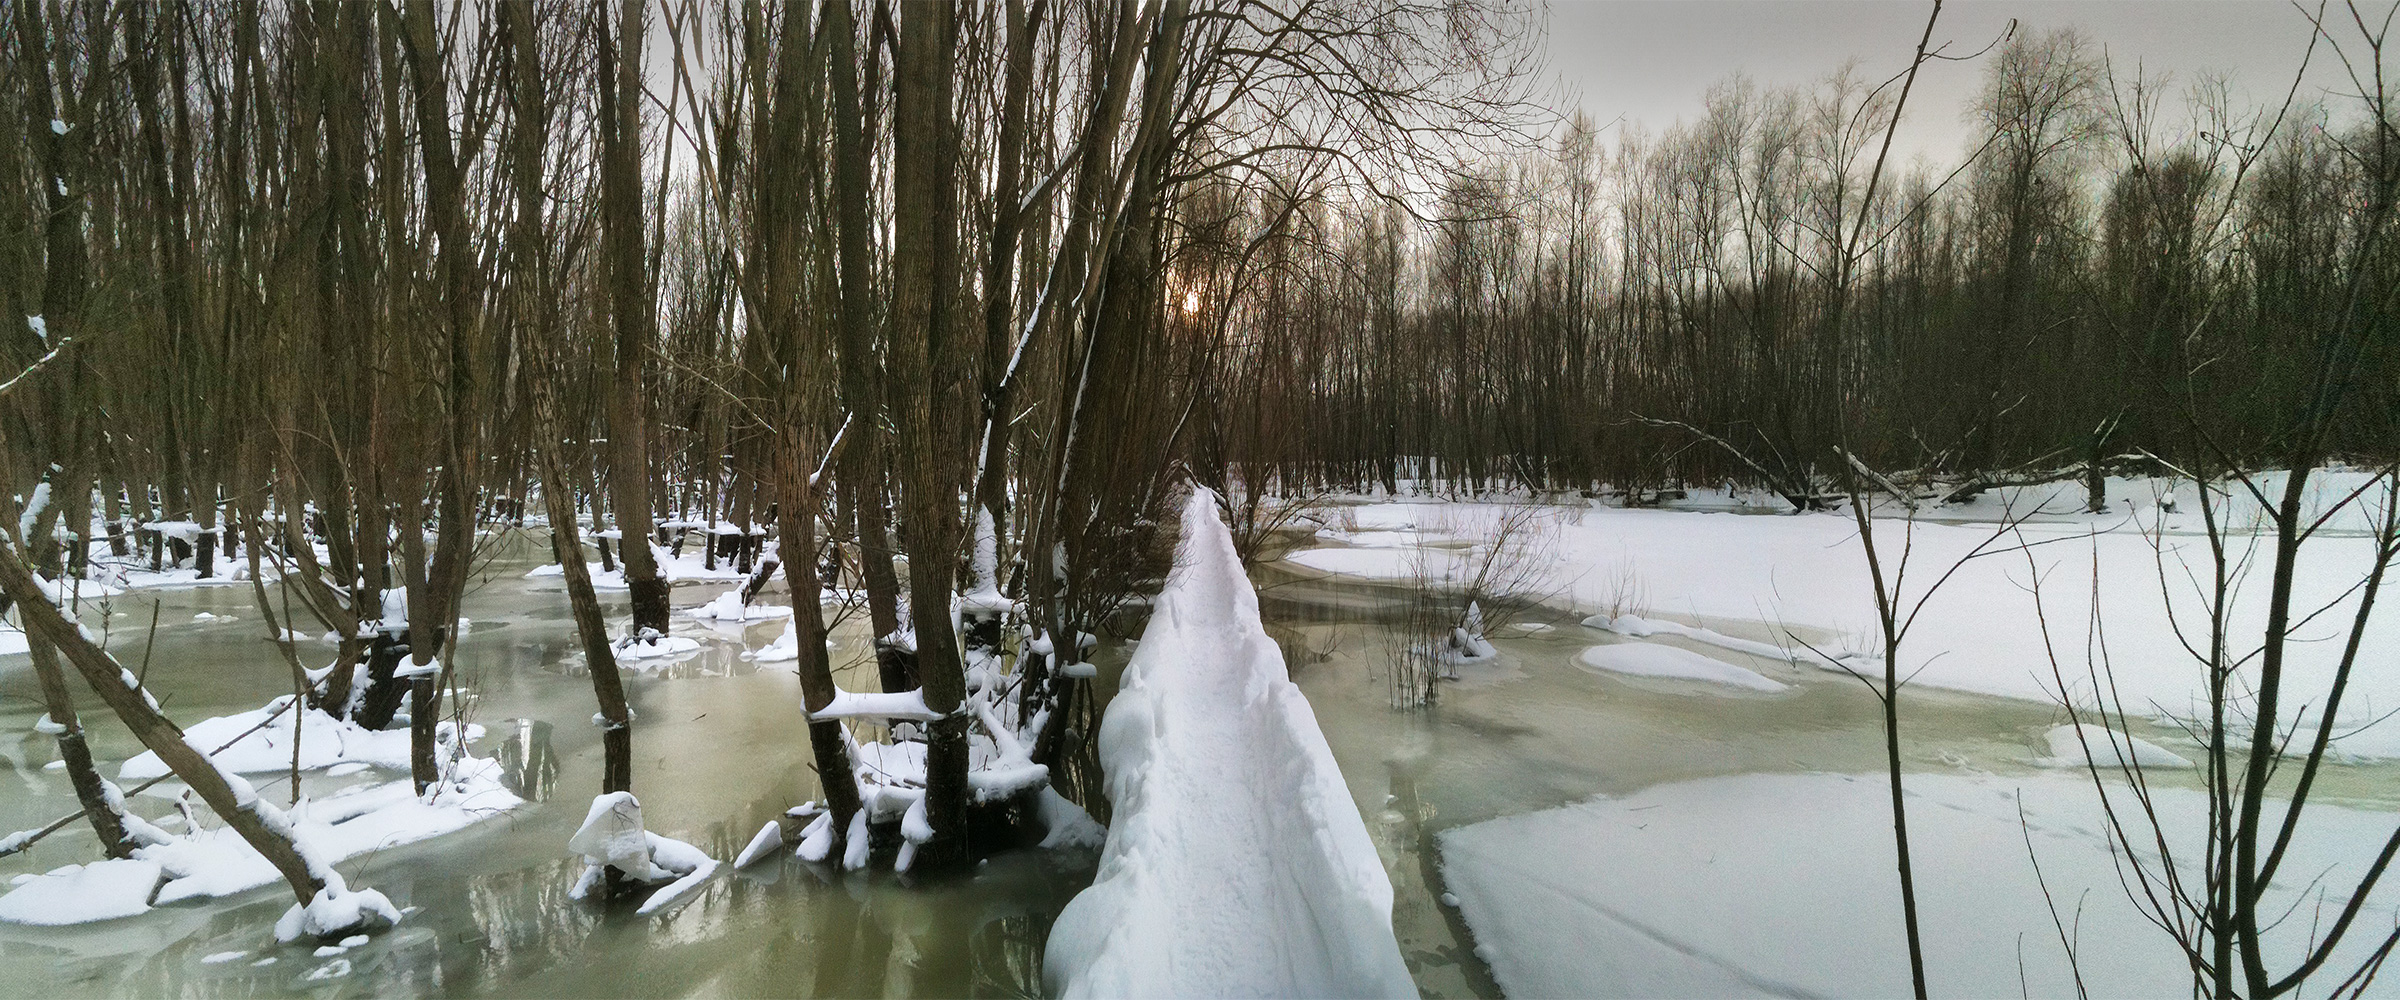 PANORAMA DIARY | Iphoneography blog | Winter path